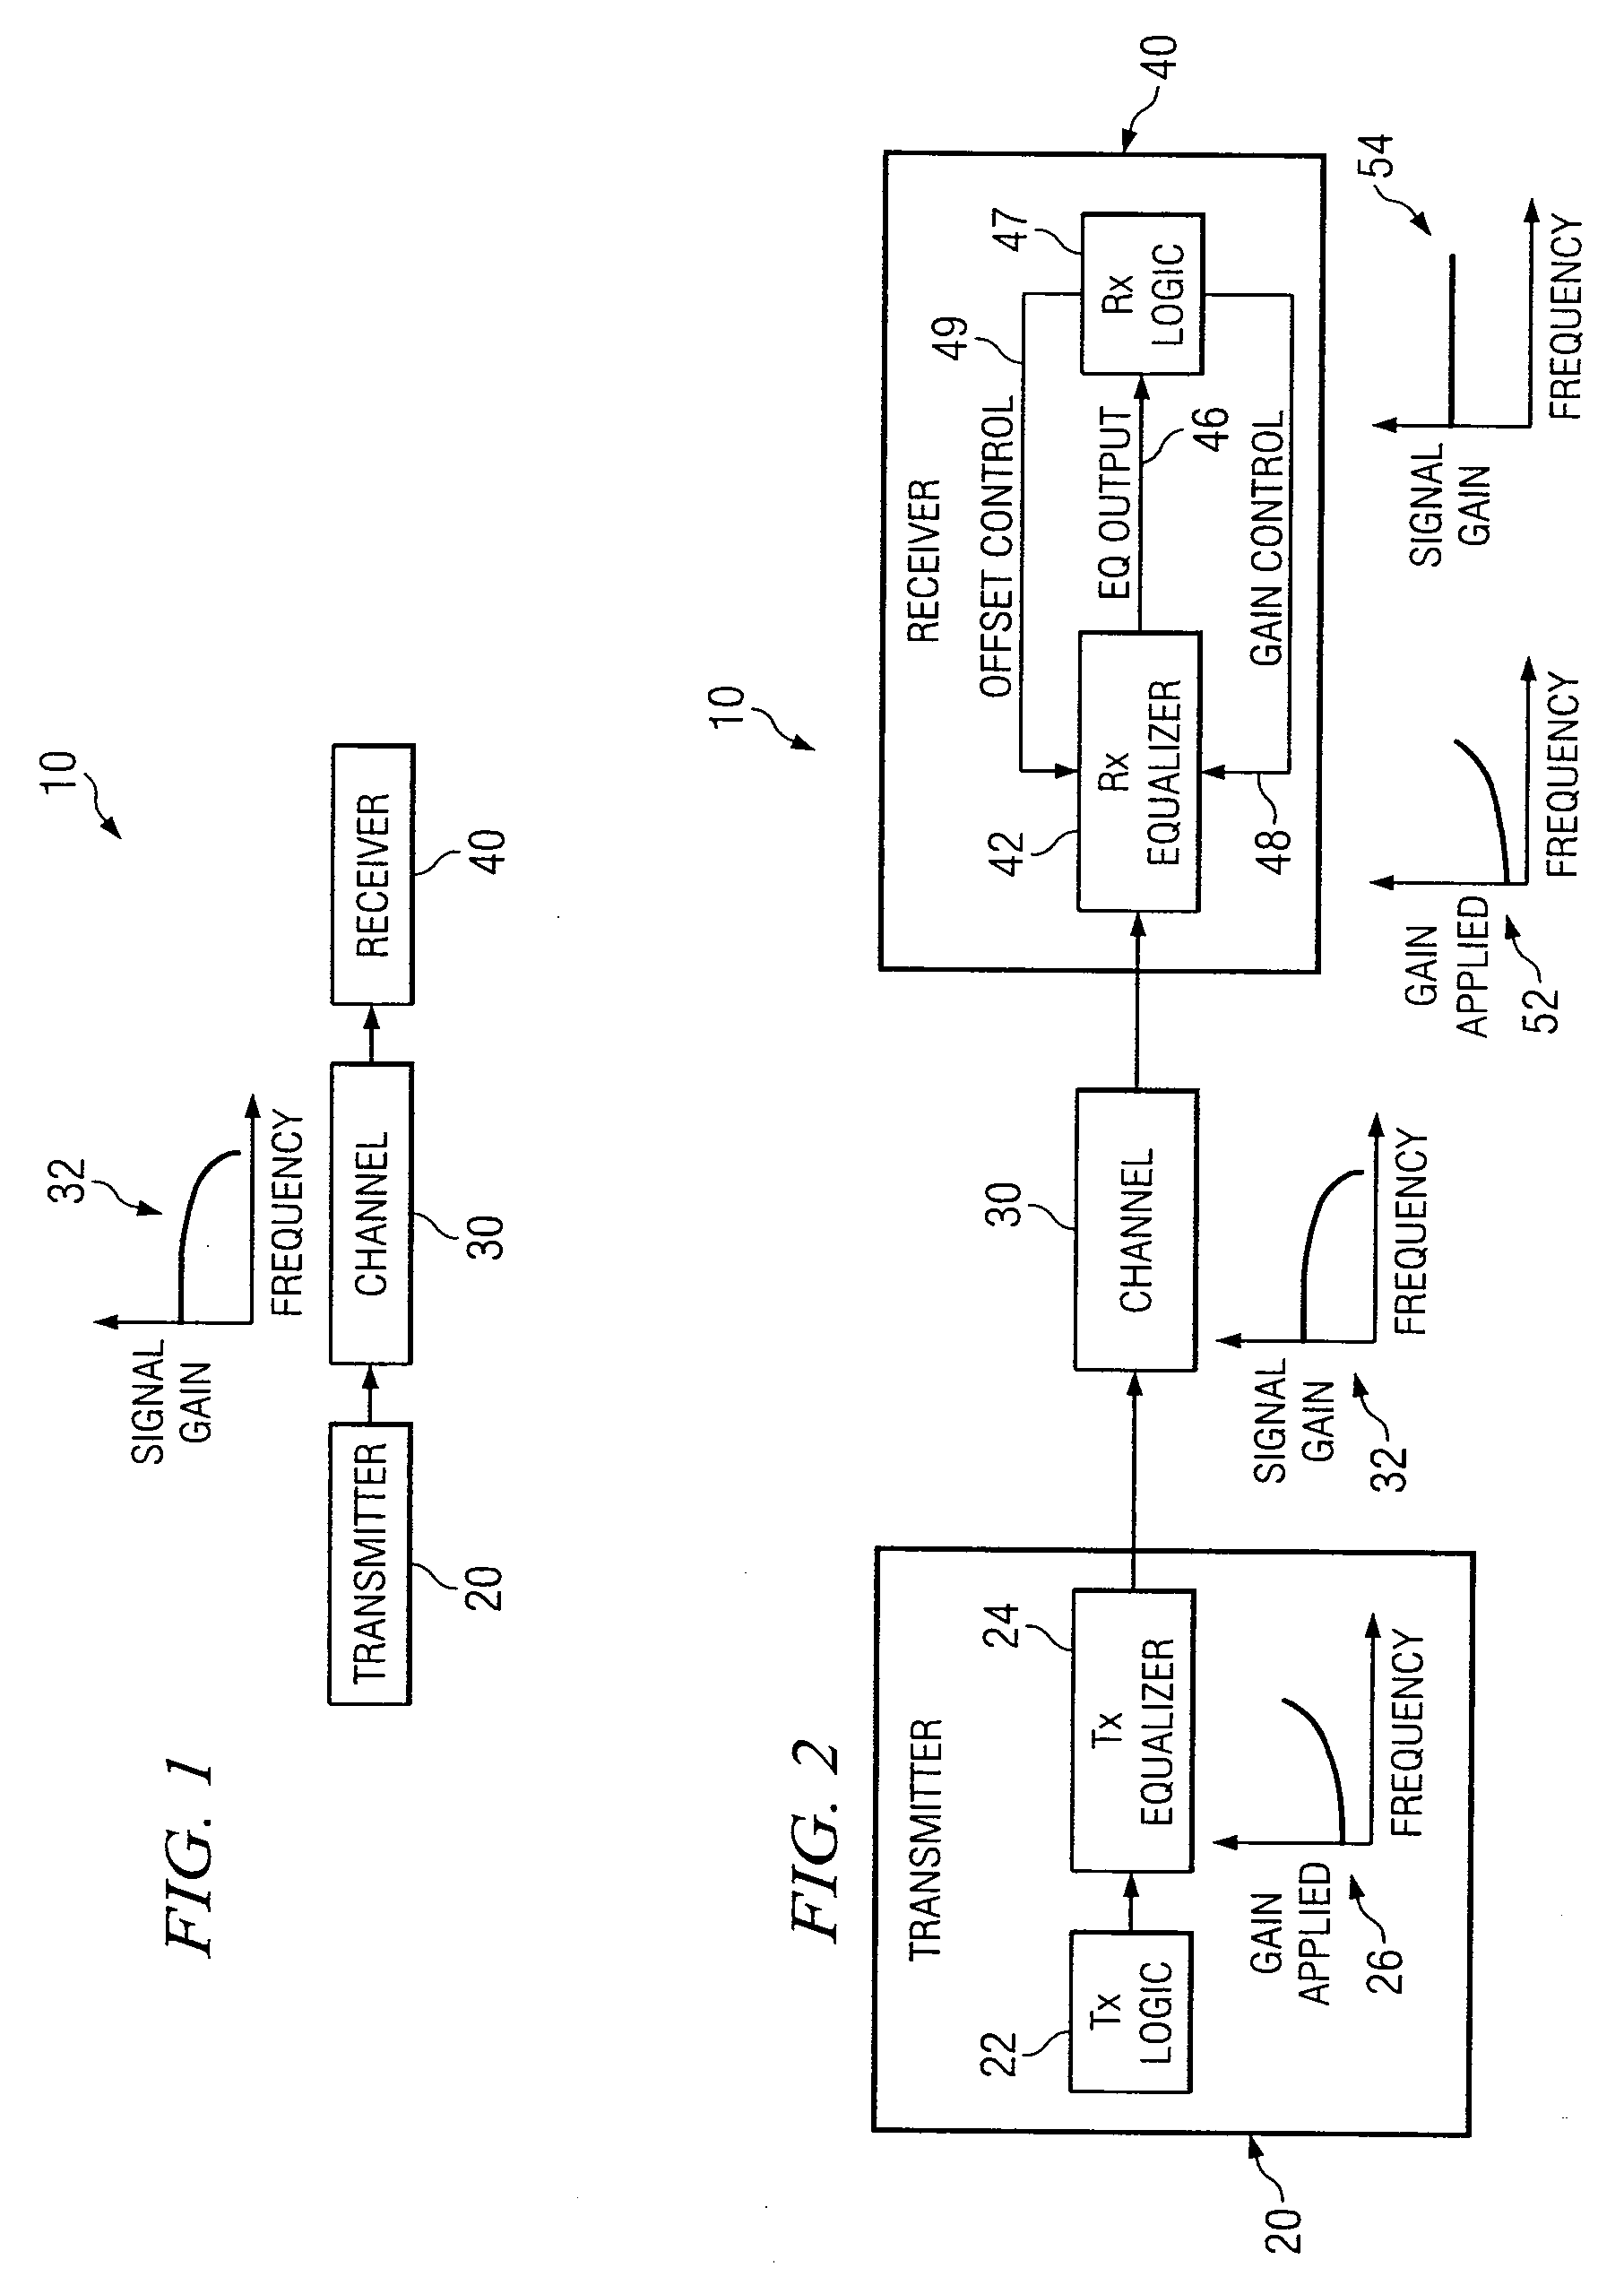 System and Method for the Adjustment of Compensation Applied to a Signal